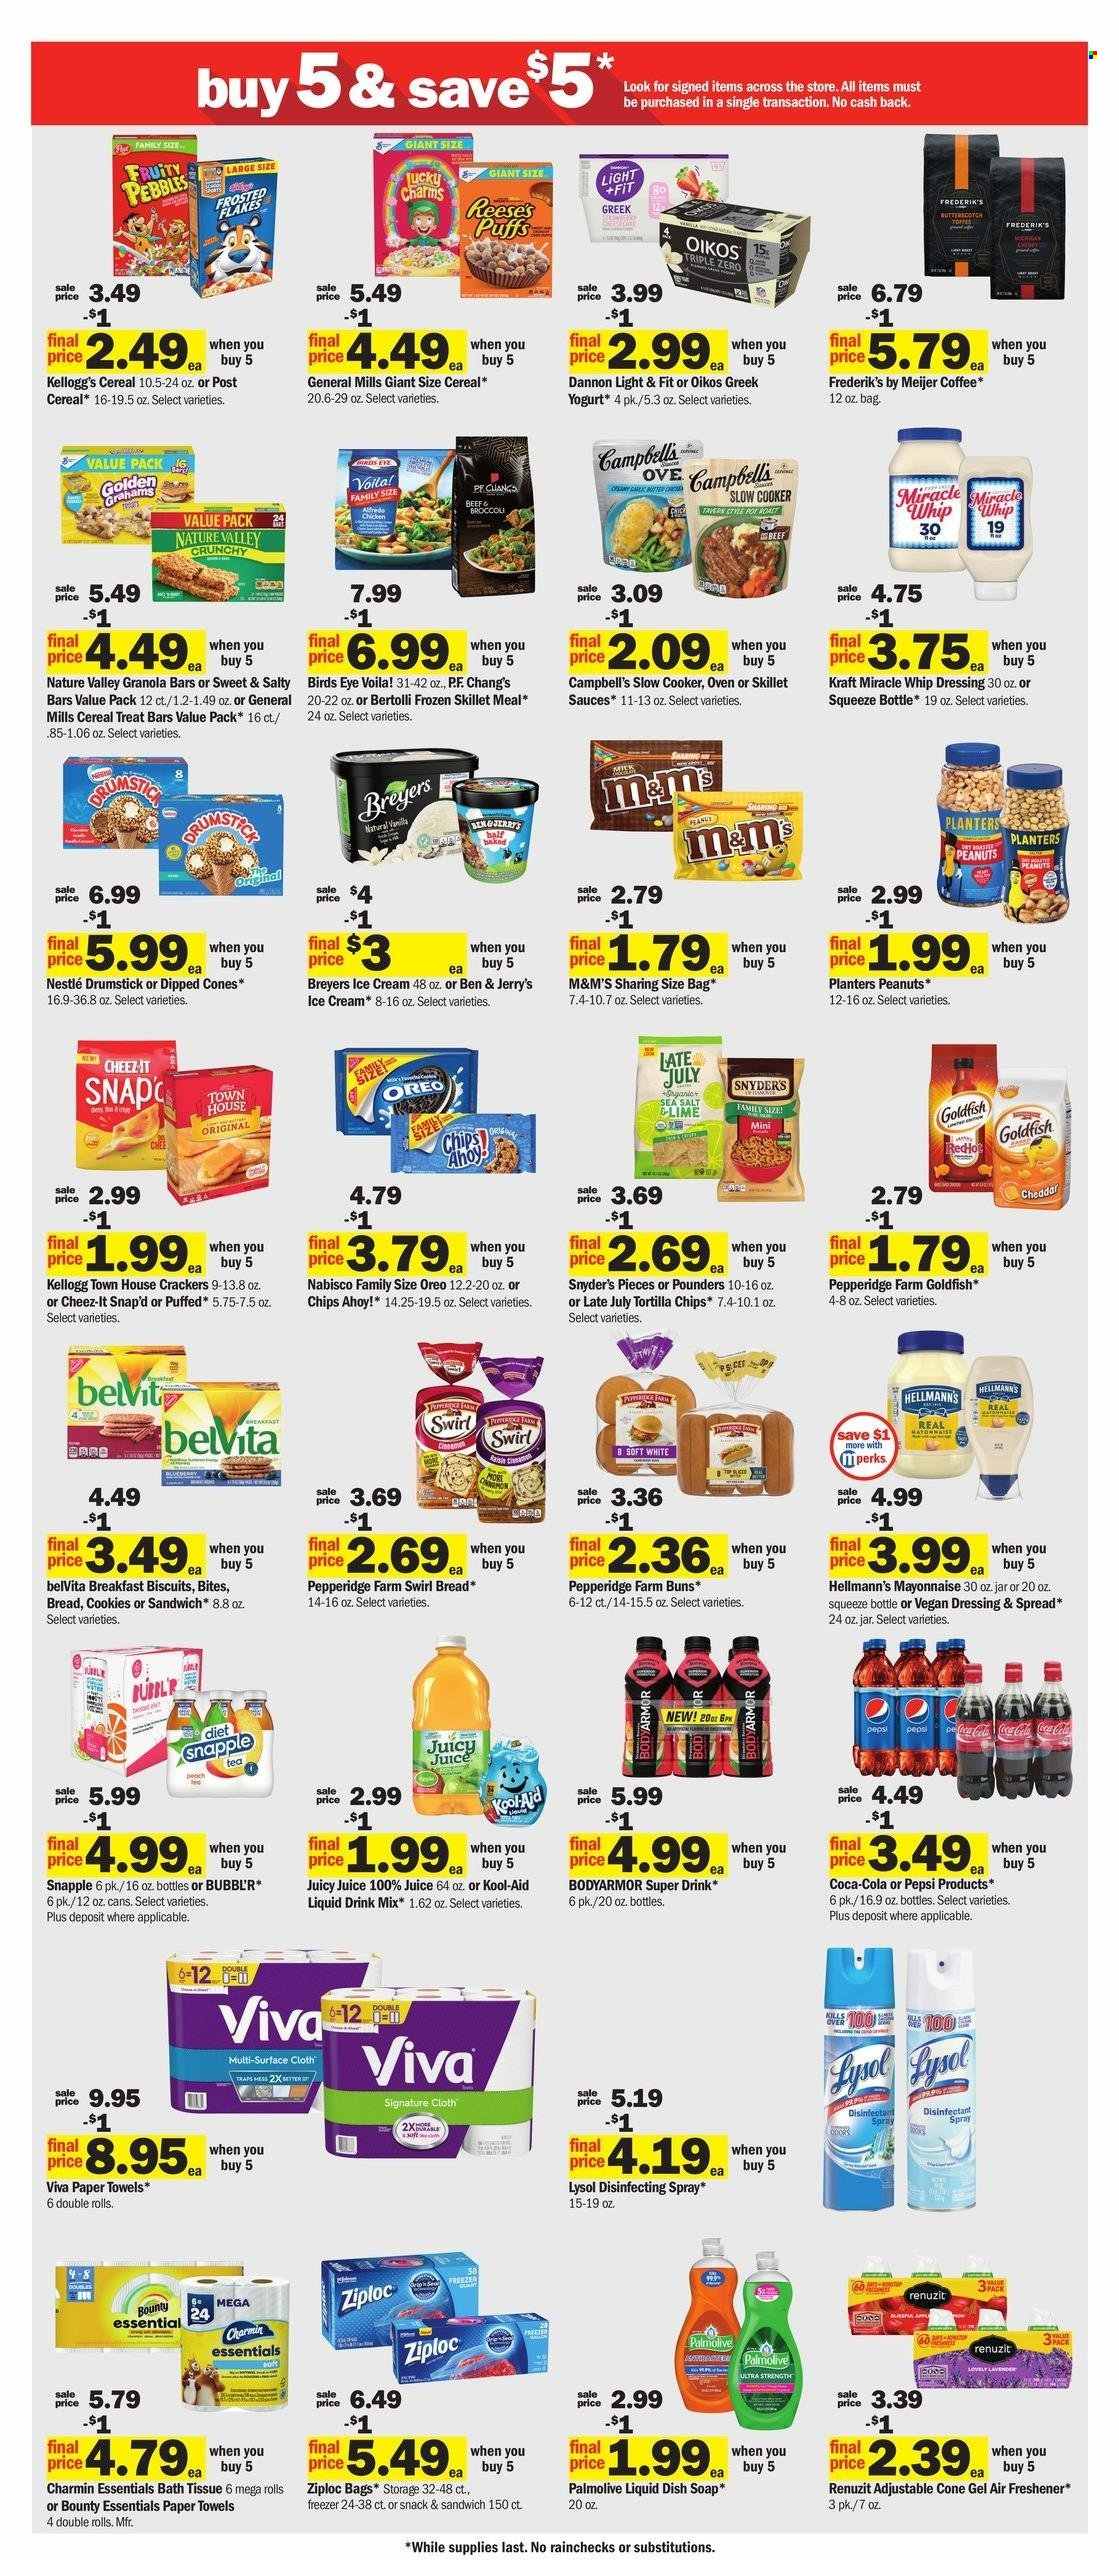 thumbnail - Meijer Flyer - 02/05/2023 - 02/11/2023 - Sales products - buns, puffs, Campbell's, Bird's Eye, Kraft®, Bertolli, greek yoghurt, Oreo, yoghurt, Oikos, Dannon, mayonnaise, Miracle Whip, Hellmann’s, ice cream, Reese's, Ben & Jerry's, butterscotch, cookies, Nestlé, Bounty, M&M's, crackers, Kellogg's, biscuit, Chips Ahoy!, tortilla chips, Goldfish, Cheez-It, cereals, granola bar, Frosted Flakes, Fruity Pebbles, belVita, Nature Valley, dressing, peanuts, Planters, Coca-Cola, Pepsi, juice, Snapple, coffee, Ron Pelicano, beer, bath tissue, kitchen towels, paper towels, Charmin, desinfection, Lysol, Palmolive, soap, Ziploc, pot, pan, Renuzit, air freshener, oven, slow cooker, cap, Coors. Page 4.